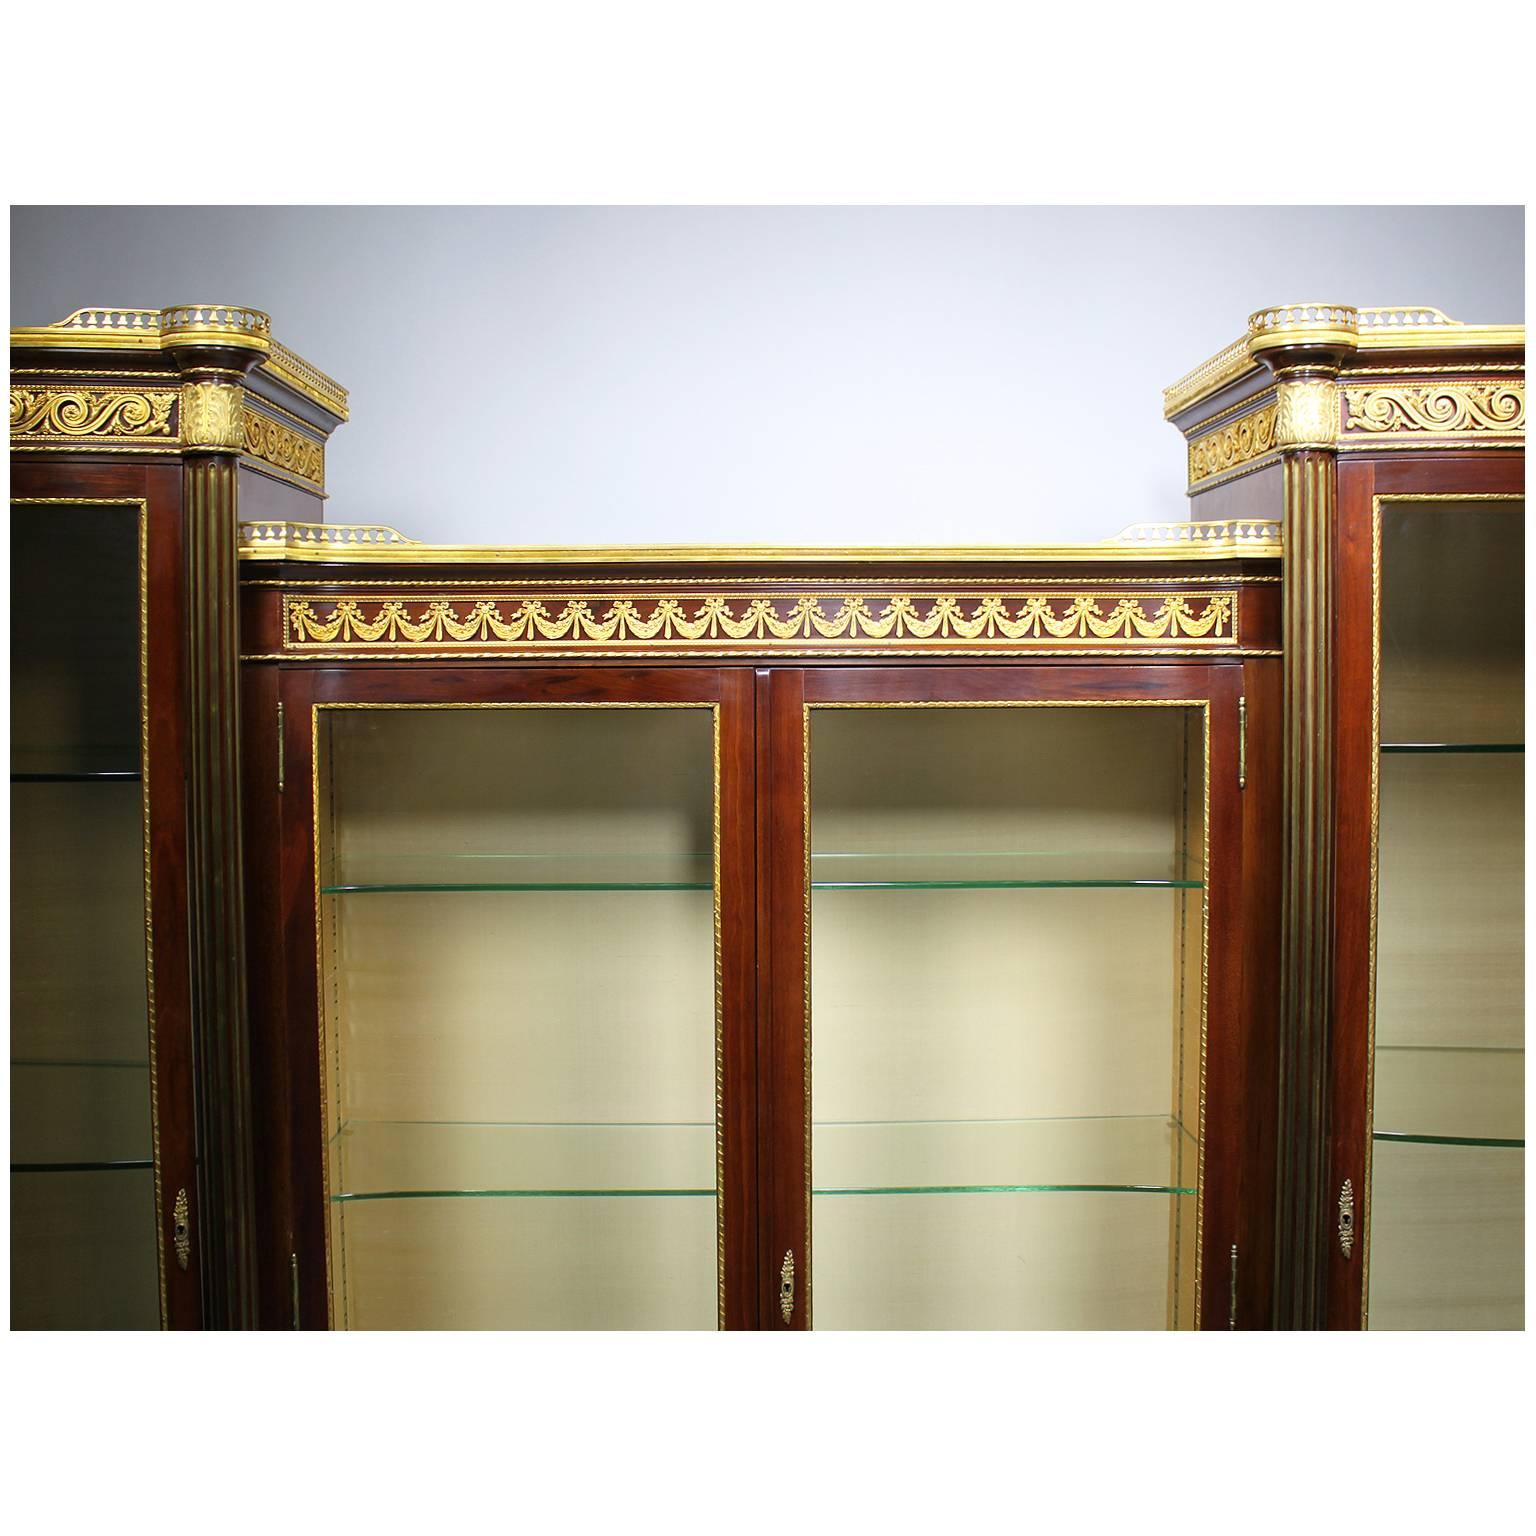 A very Fine French 19th-20th century Louis XVI style mahogany and ormolu-mounted four-door vitrine, with two central bombé glass doors and single bombé glass doors on each side, the fluted mahogany columns with brass inserts and wrapped-around